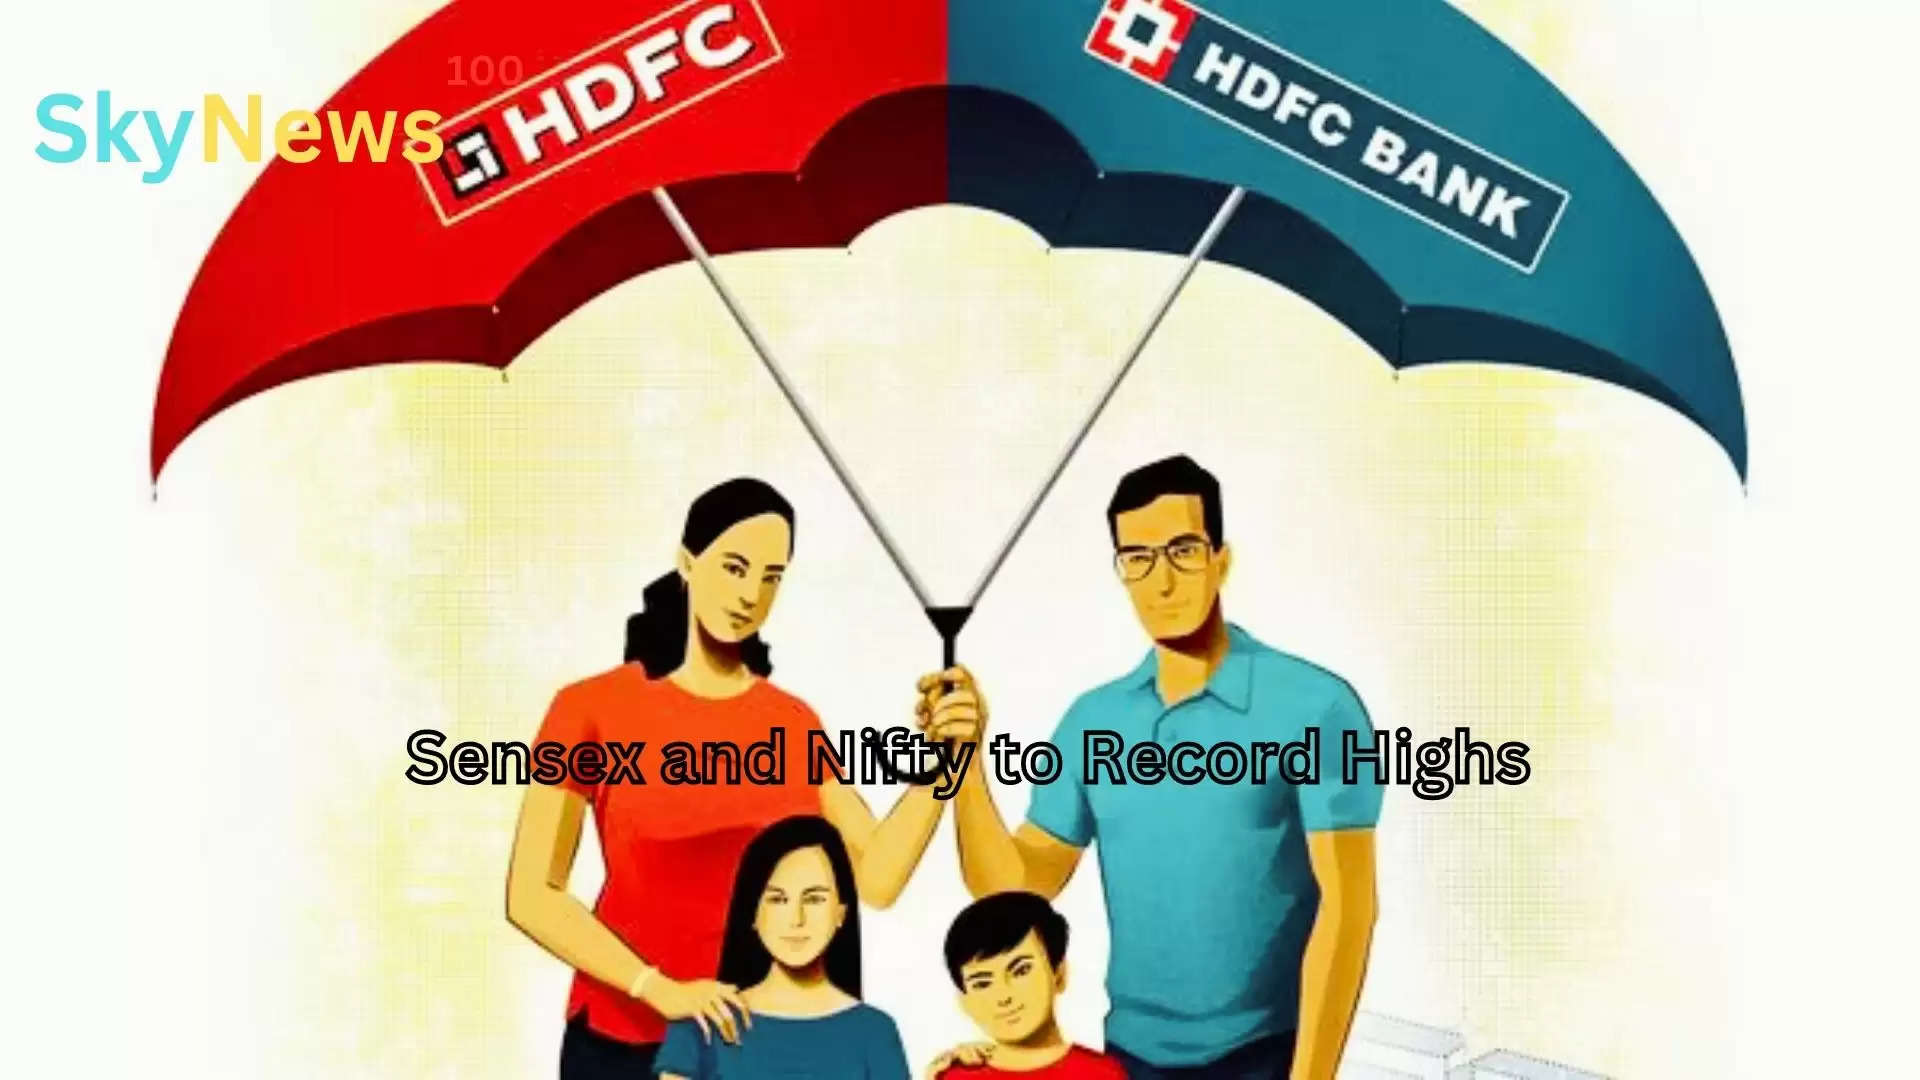 The merger of HDFC Bank and HDFC is poised to give rise to a financial behemoth, boasting a market capitalization of approximately Rs. 14.37 lakh crore. 